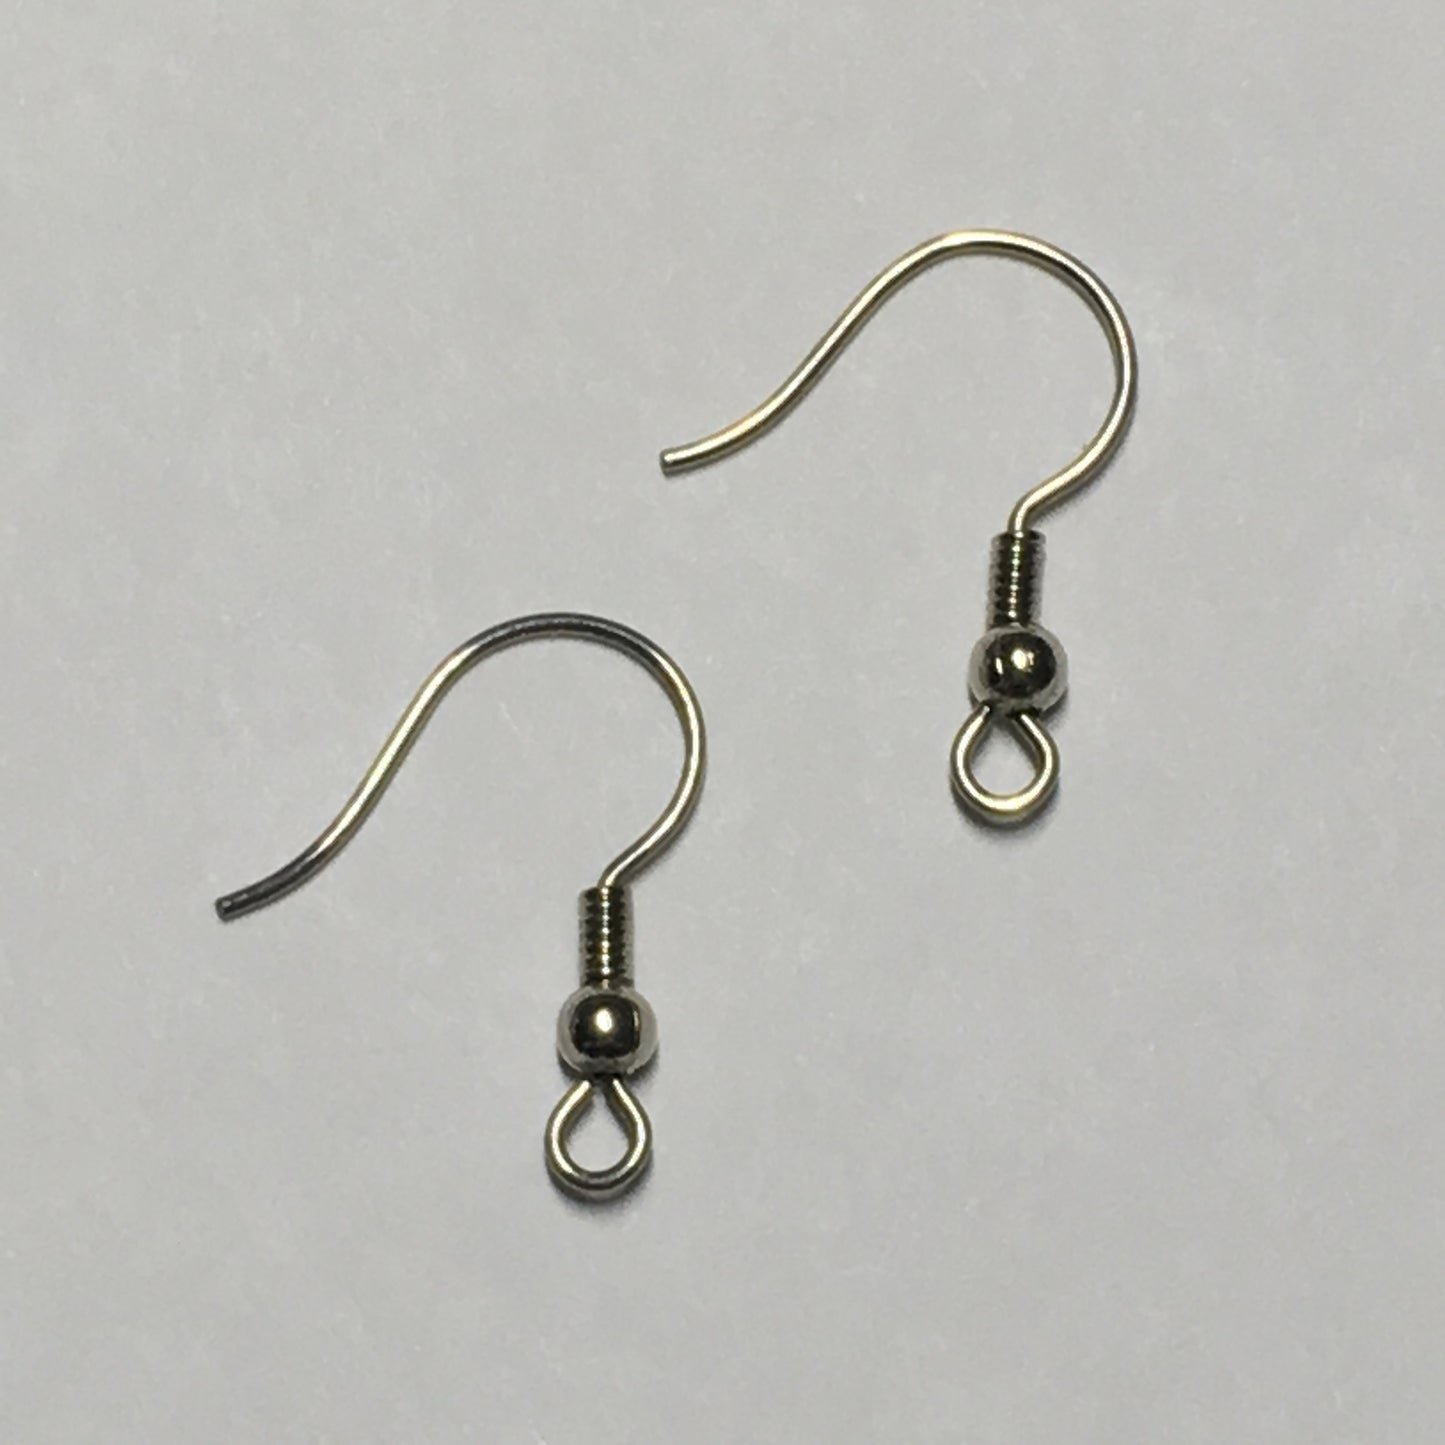 21-Gauge 15 mm Stainless Steel Hypoallergenic French Fish Hook Ear Wires - 1 Pair